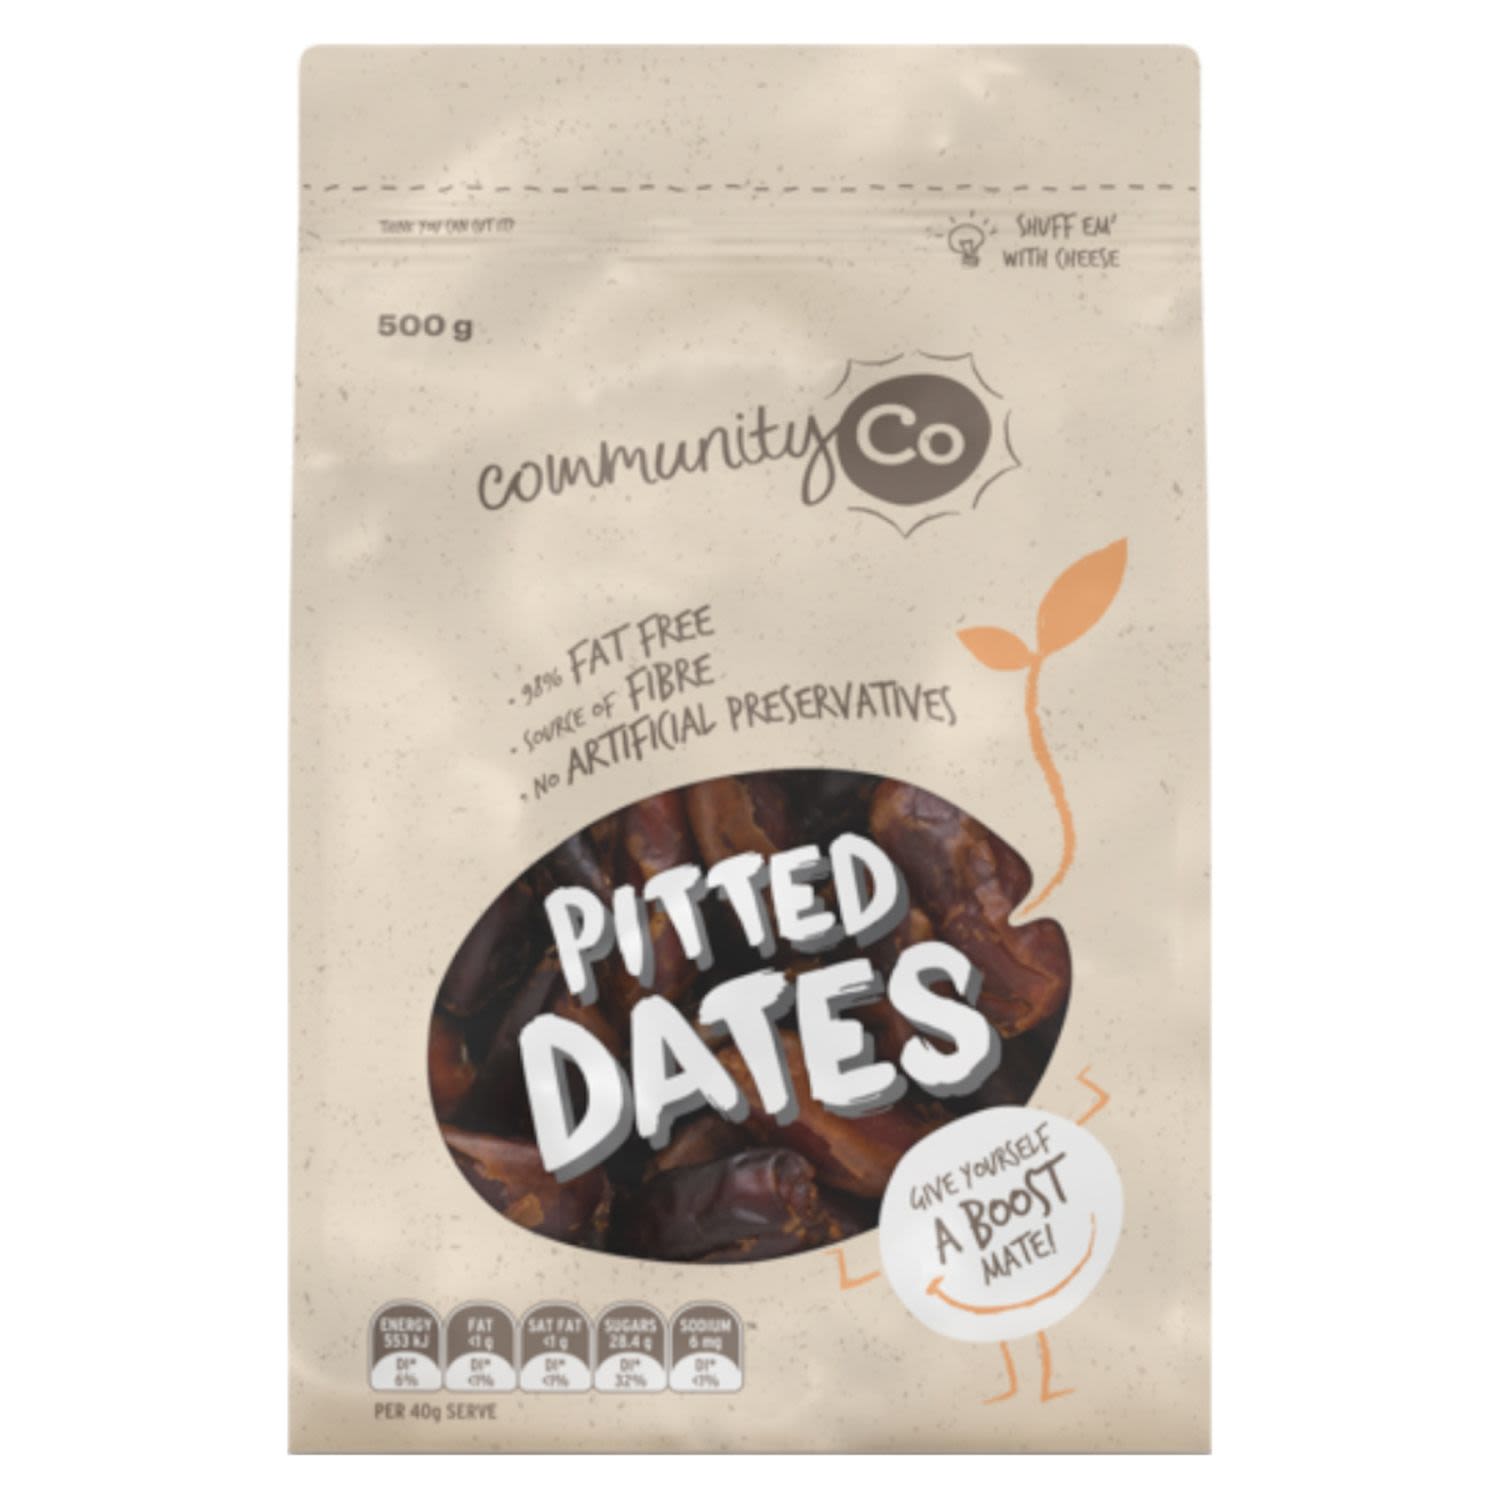 Community Co Pitted Dates 500gm